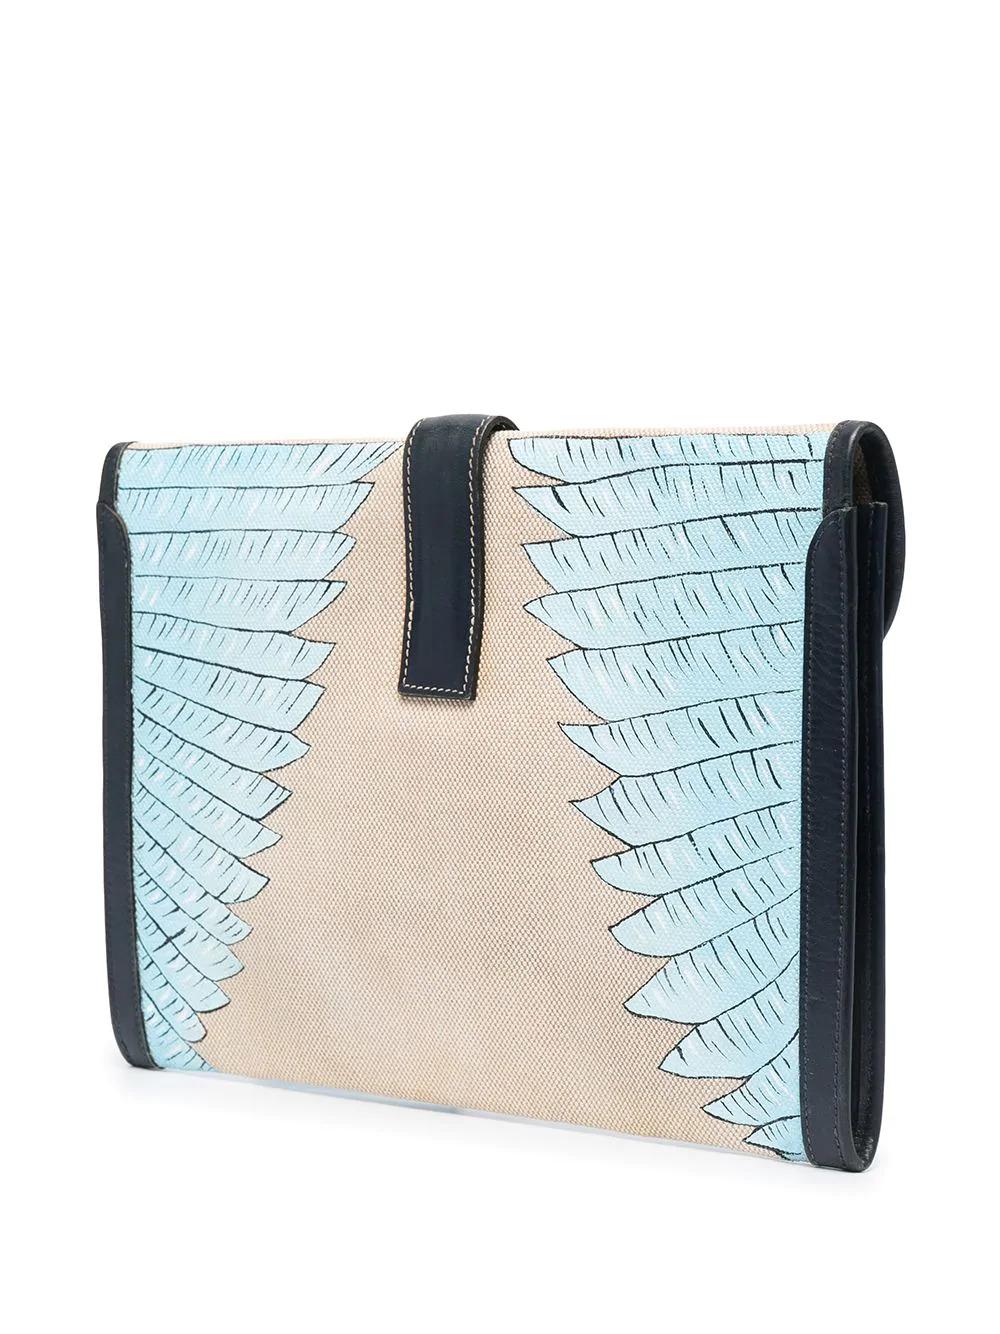 A true classic, the Jige has long been offered by Hermes. This beautiful clutch is most distinctive by its customised and handpainted bird design, in striking shades of blue. The clutch features a fold-over top and leather “H” pull tab closure. With